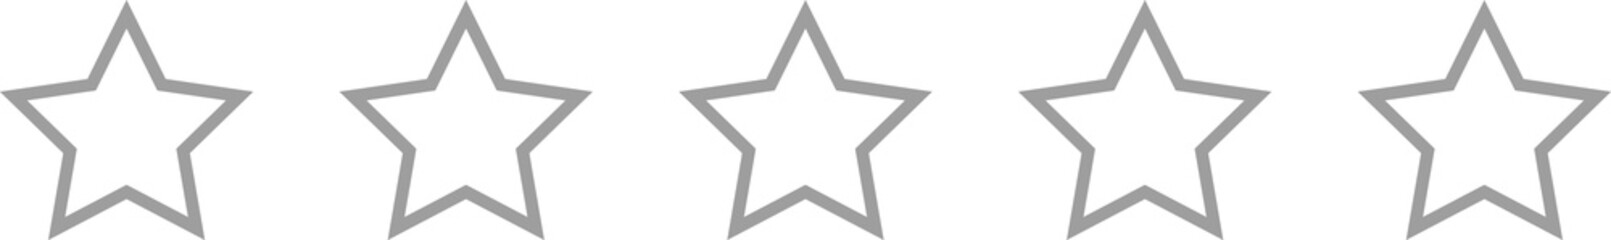 Zero stars, customer quality symbol. Zero star review rating. Website product review stars. Rating...